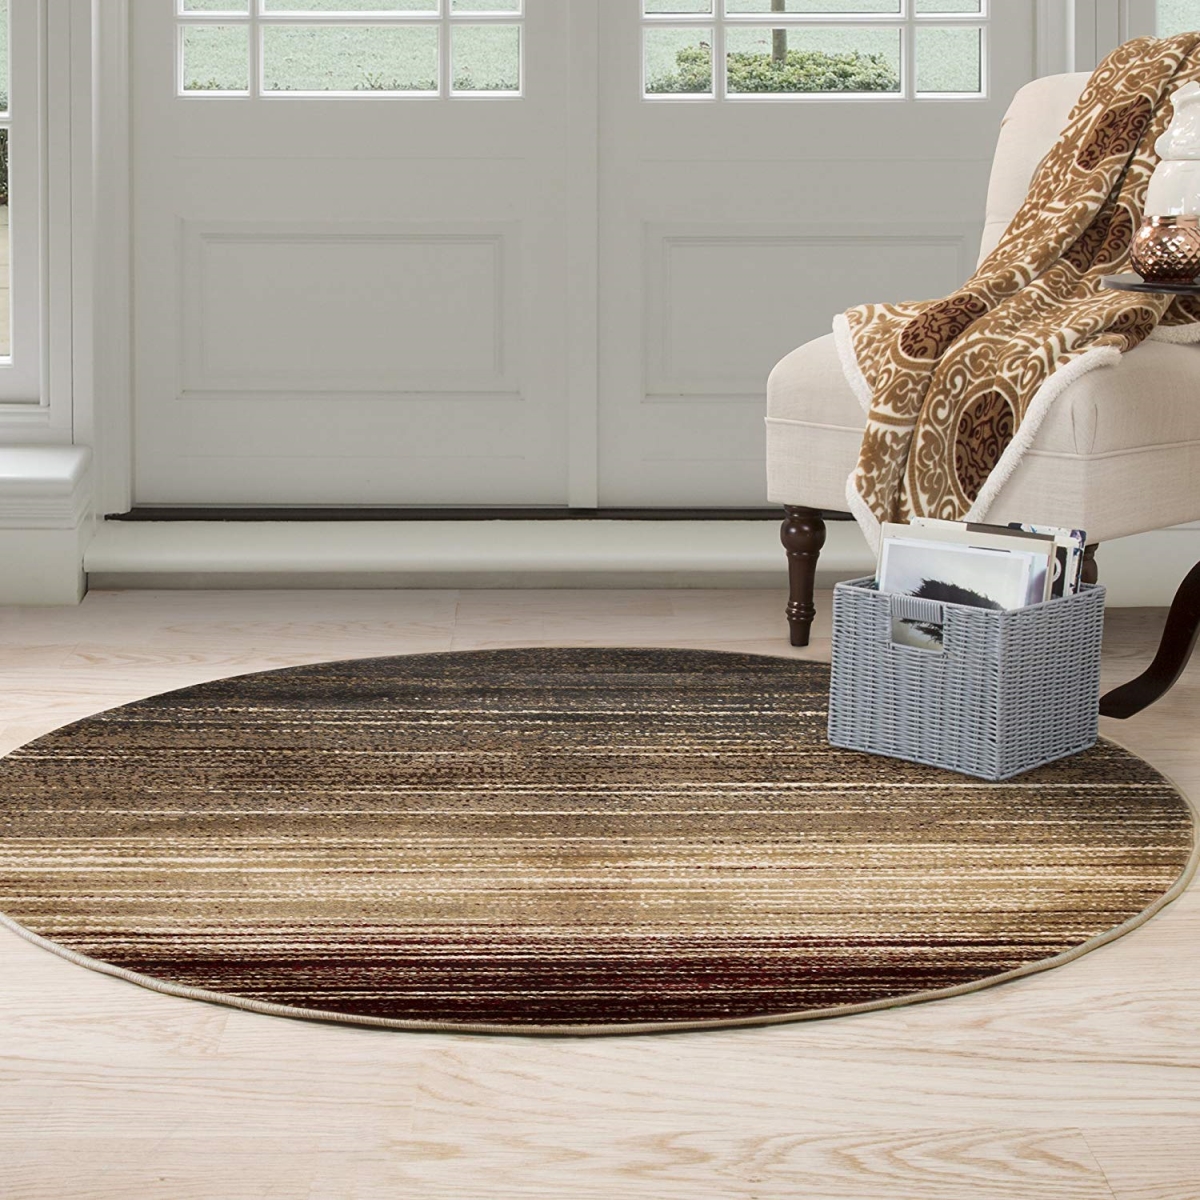 62a-27049 Opus Dark Abstract Stripes Area Round Rug, 5 Ft. - Cream